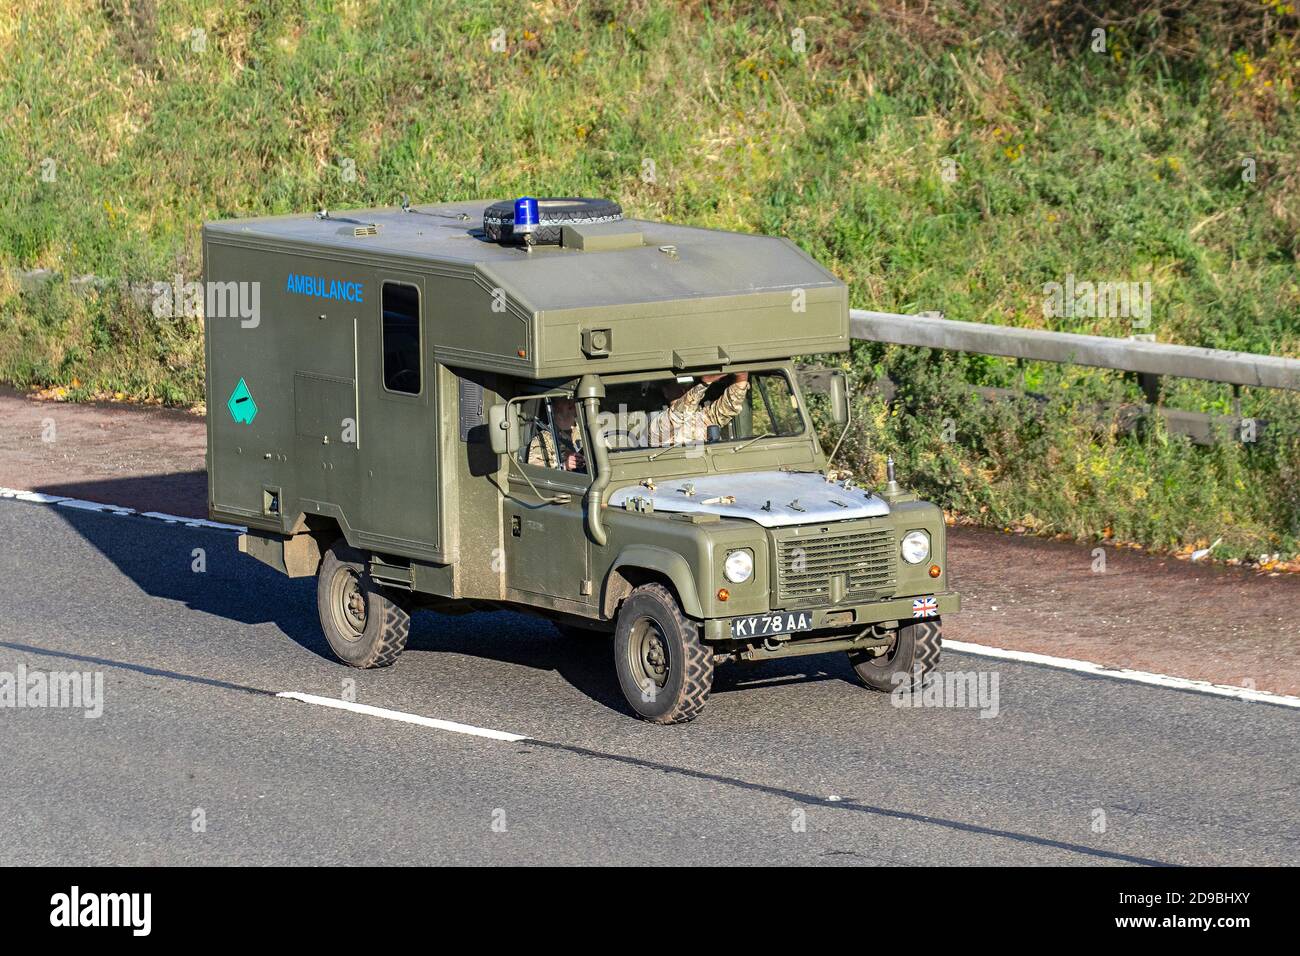 British Army military ambulance vehicles in Preston, Lancashire. UK Army vehicles & green Land Rover en-route to Liverpool citywide Test & Trace. Stock Photo